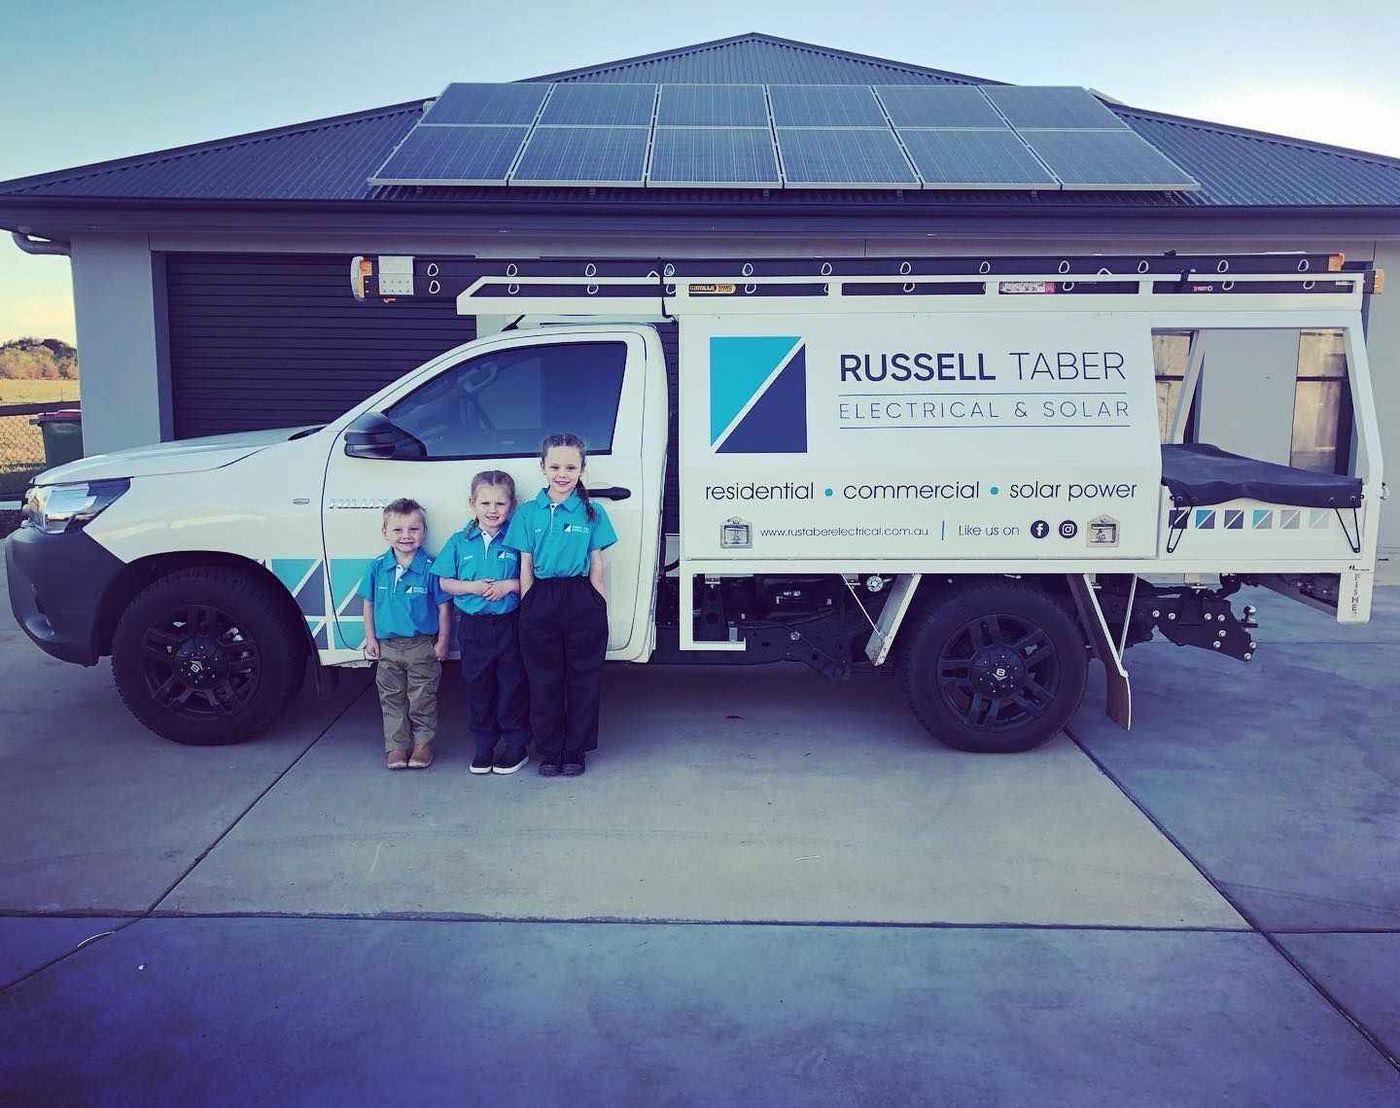 Russell Taber Electrical & Solar image